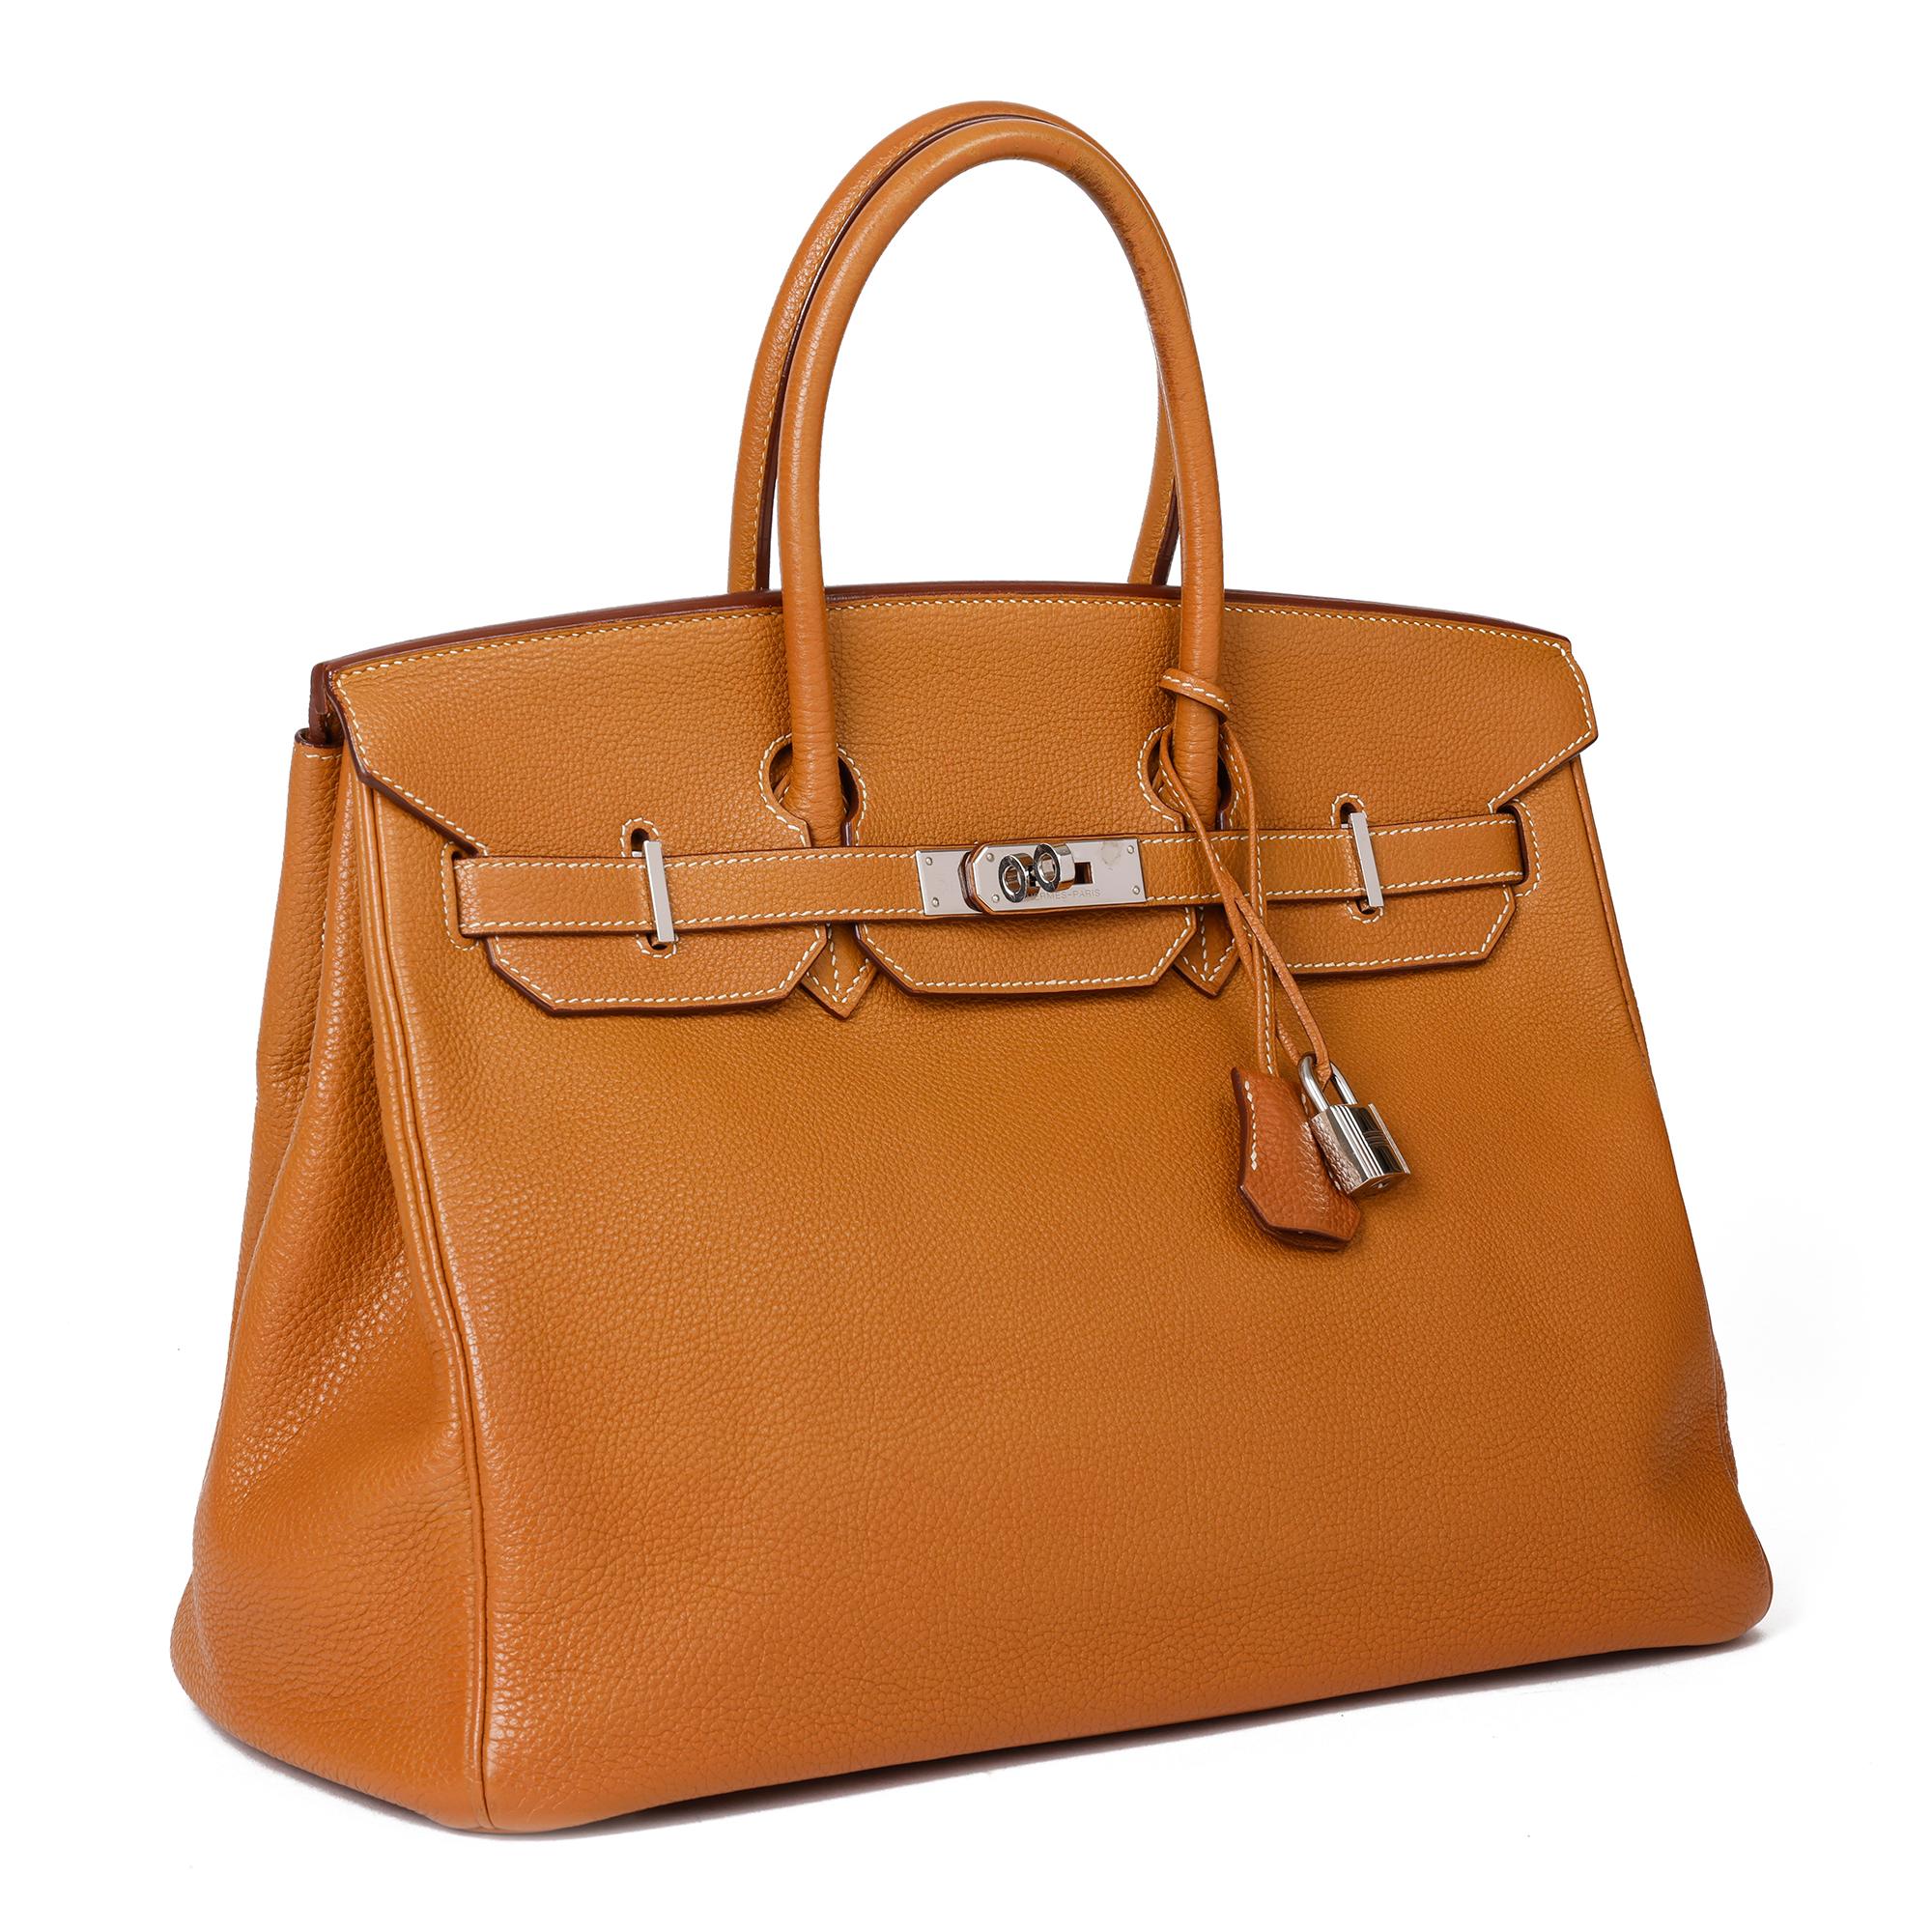 HERMÈS
Caramel Togo Leather Birkin 35cm

Xupes Reference: CB347
Serial Number: [K]
Age (Circa): 2007
Accompanied By: Hermès Box, Dust Bag, Lock, Keys, Clochette, Raincover 
Authenticity Details: Date Stamp (Made in France)
Gender: Ladies
Type: